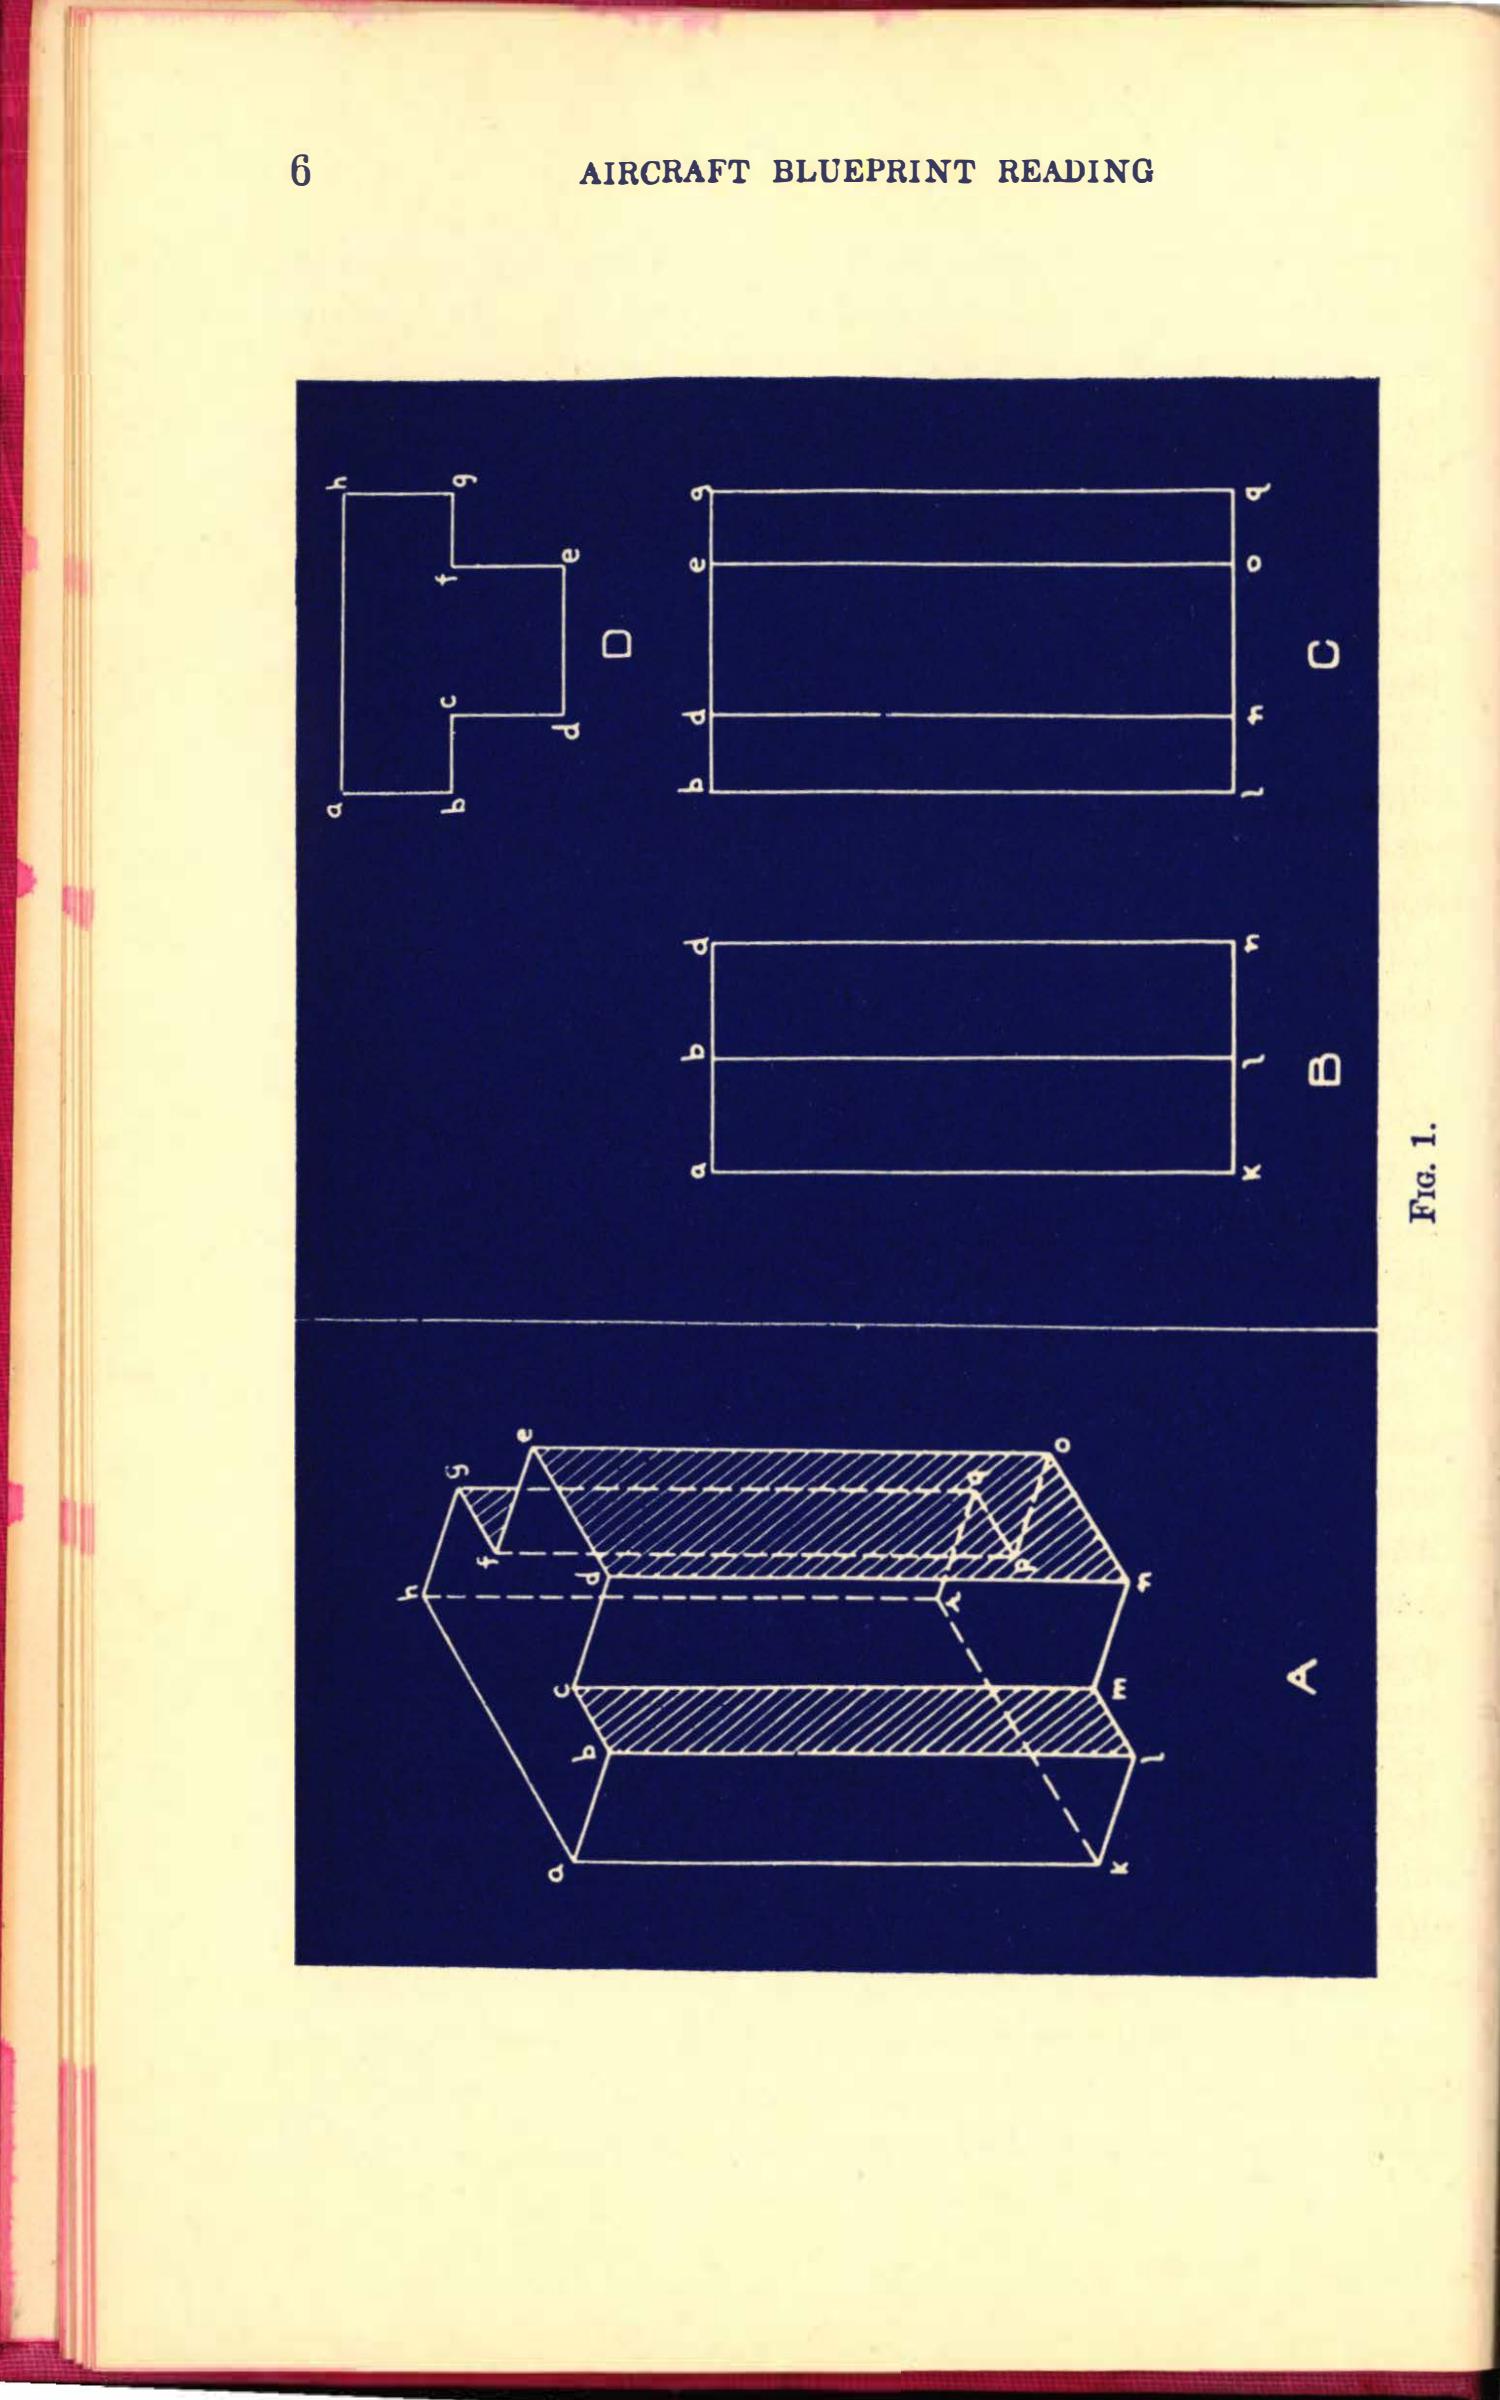 Sample page 16 from AirCorps Library document: Aircraft Blueprint Reading